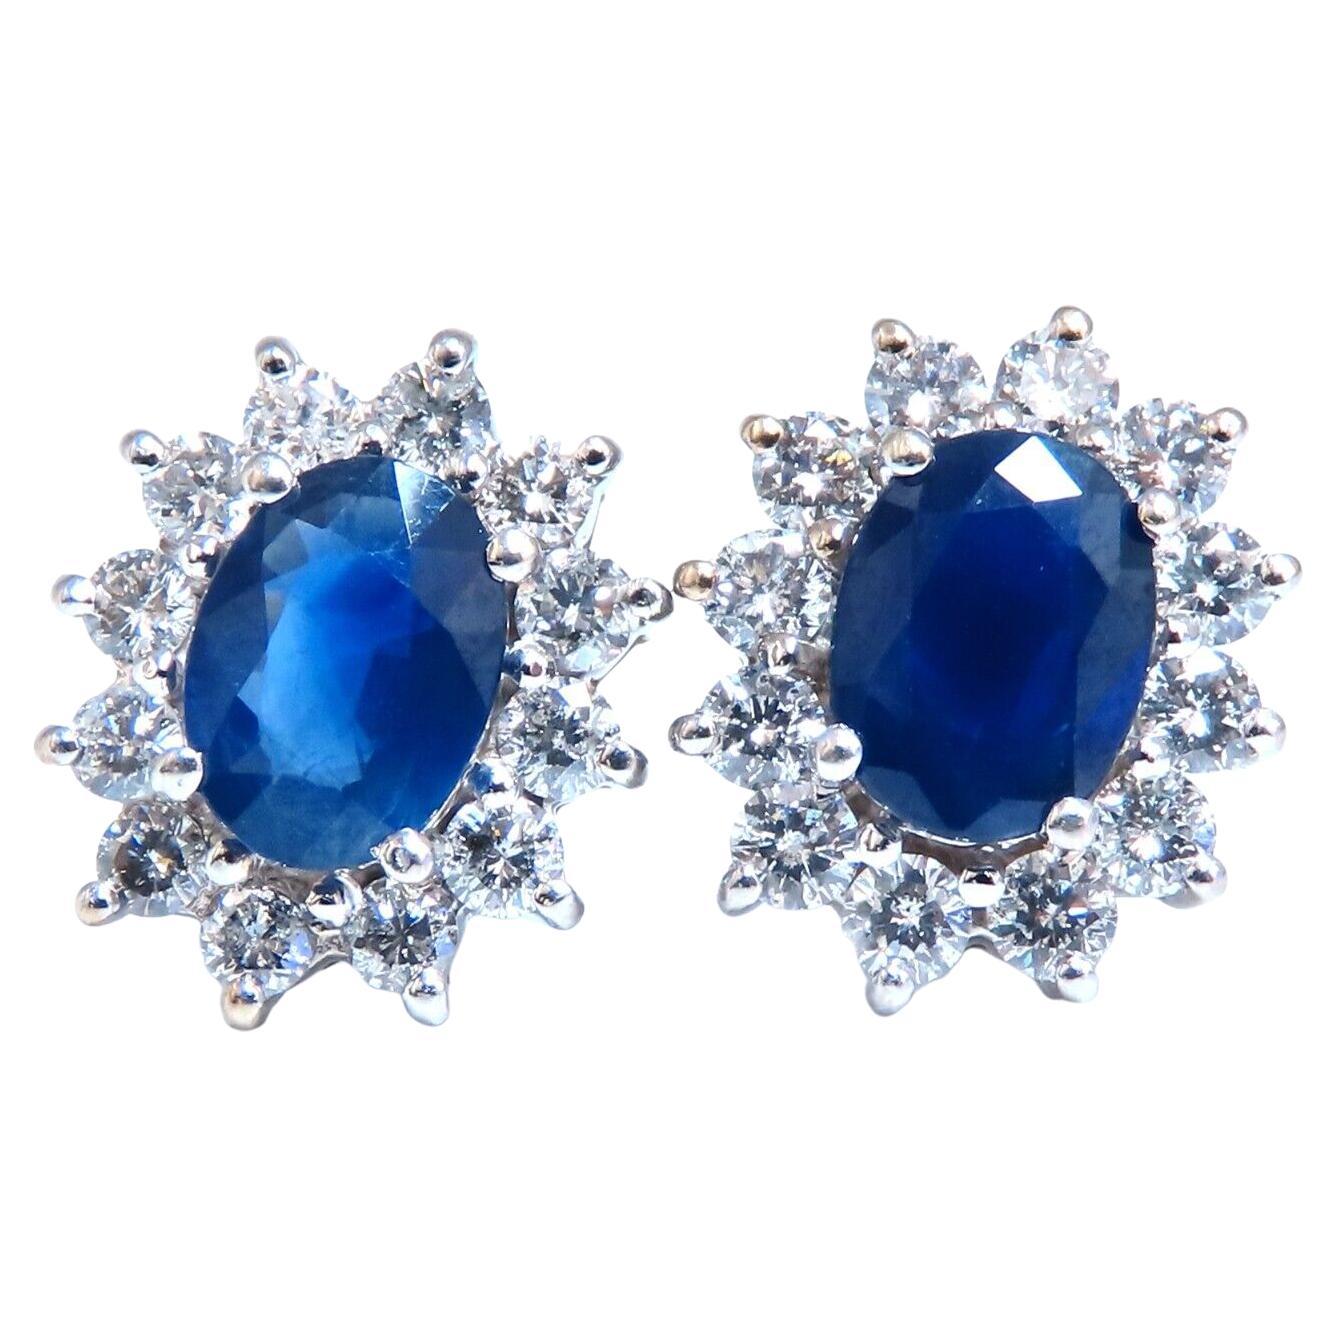 4ct Natural Sapphire Diamonds Cluster Earrings 14 Karat Gold For Sale